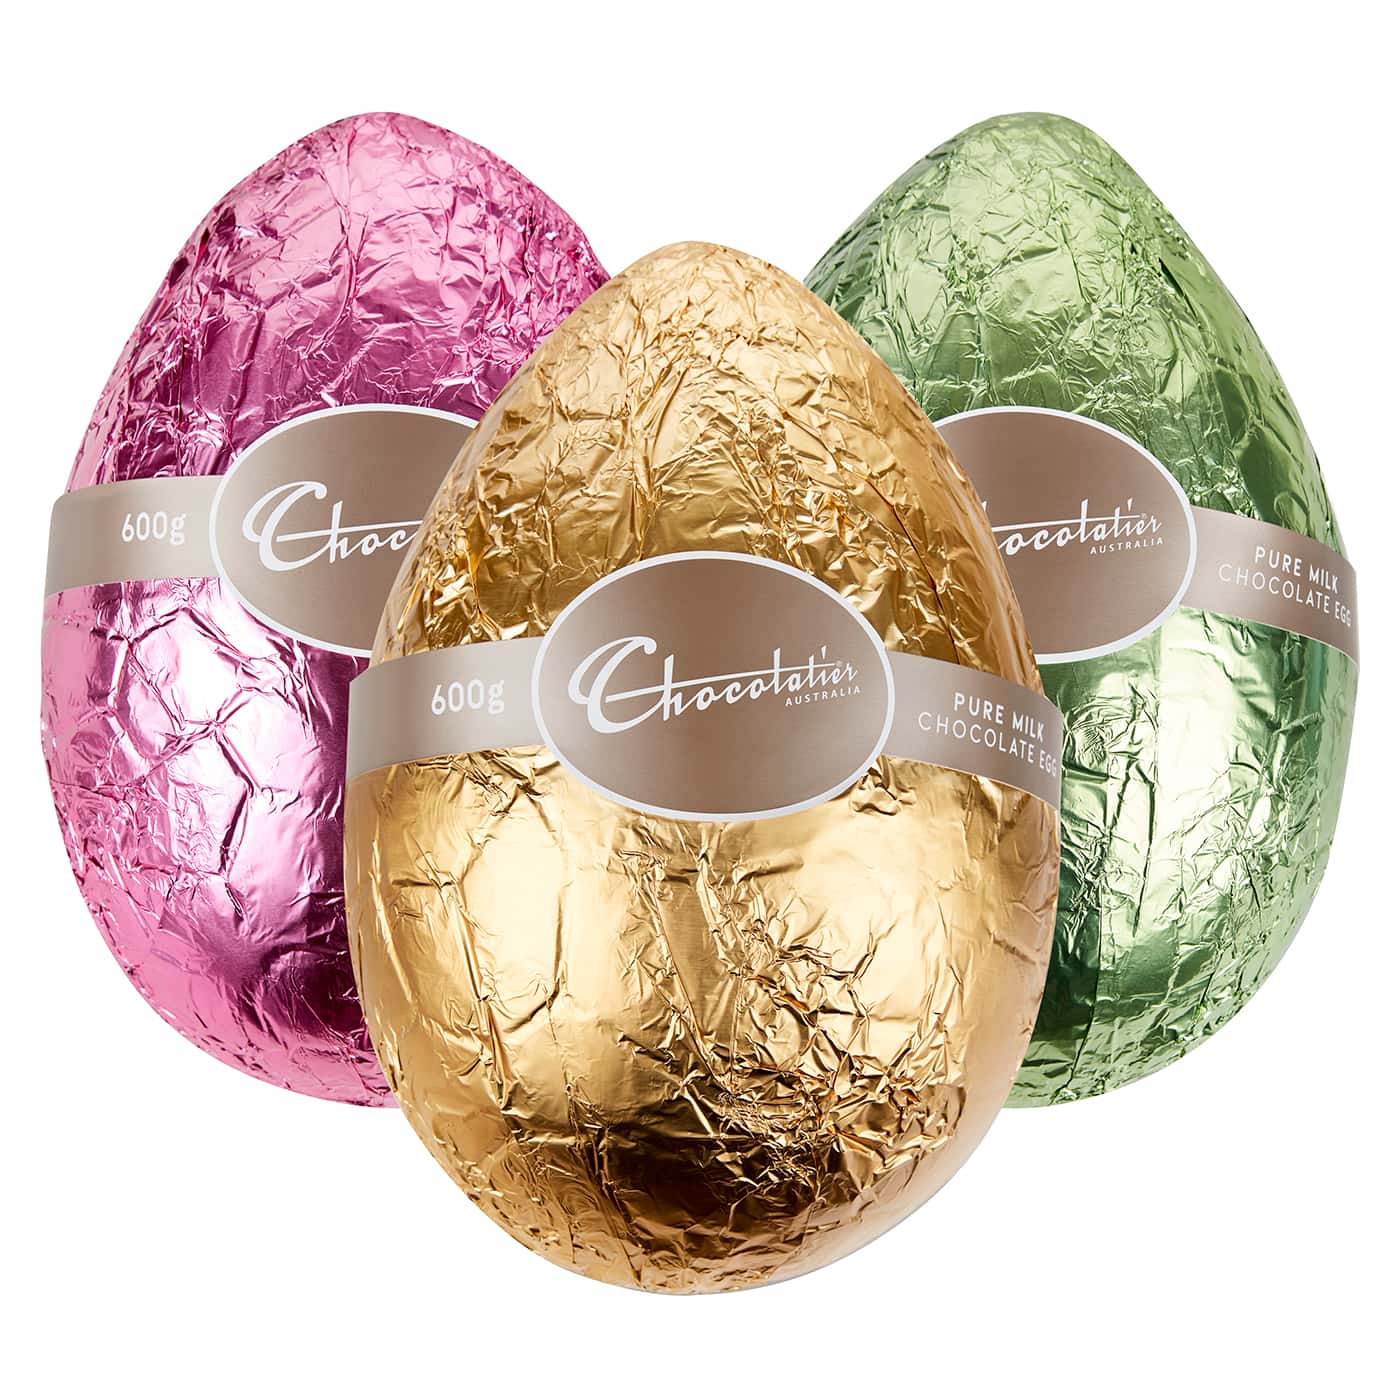 Chocolatier Australia 600g Couverture Milk Chocolate Easter Egg wrapped in assorted coloured foils.